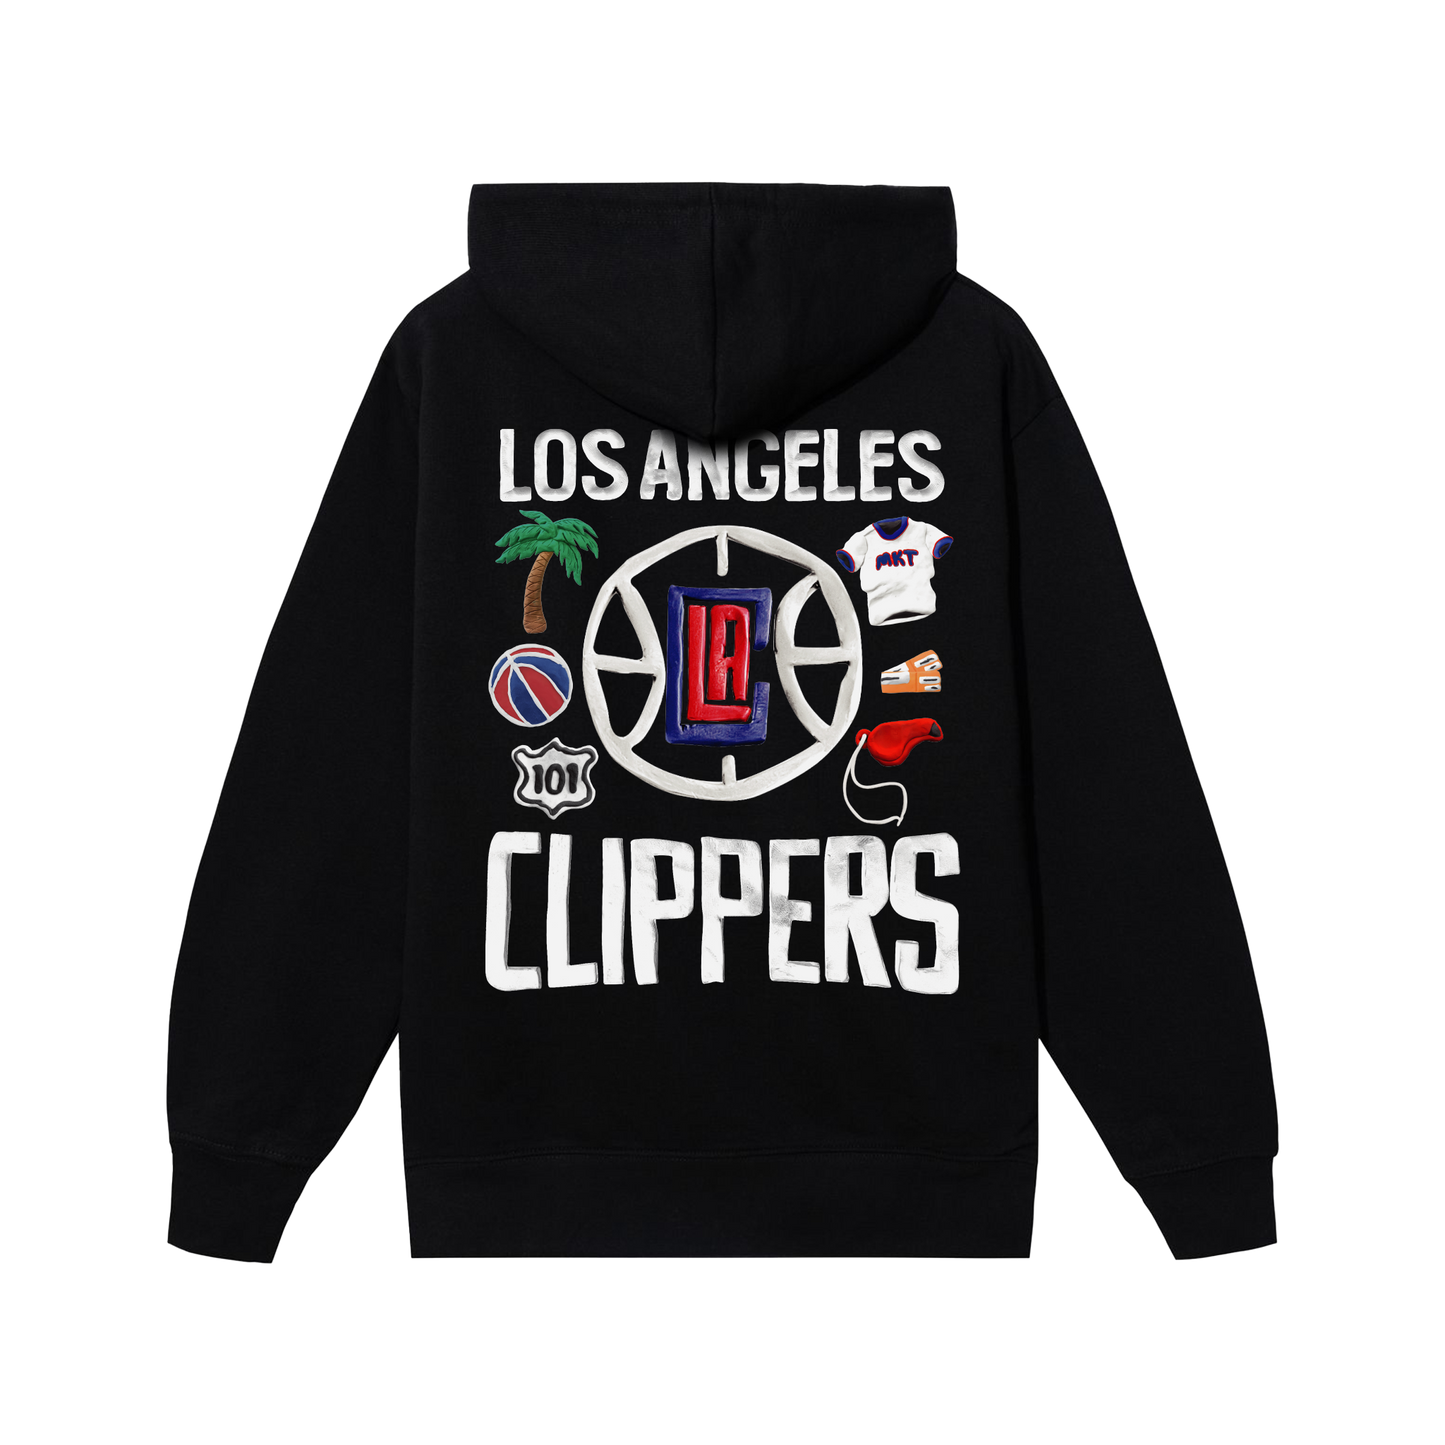 MARKET CLIPPERS HOODIE – Market